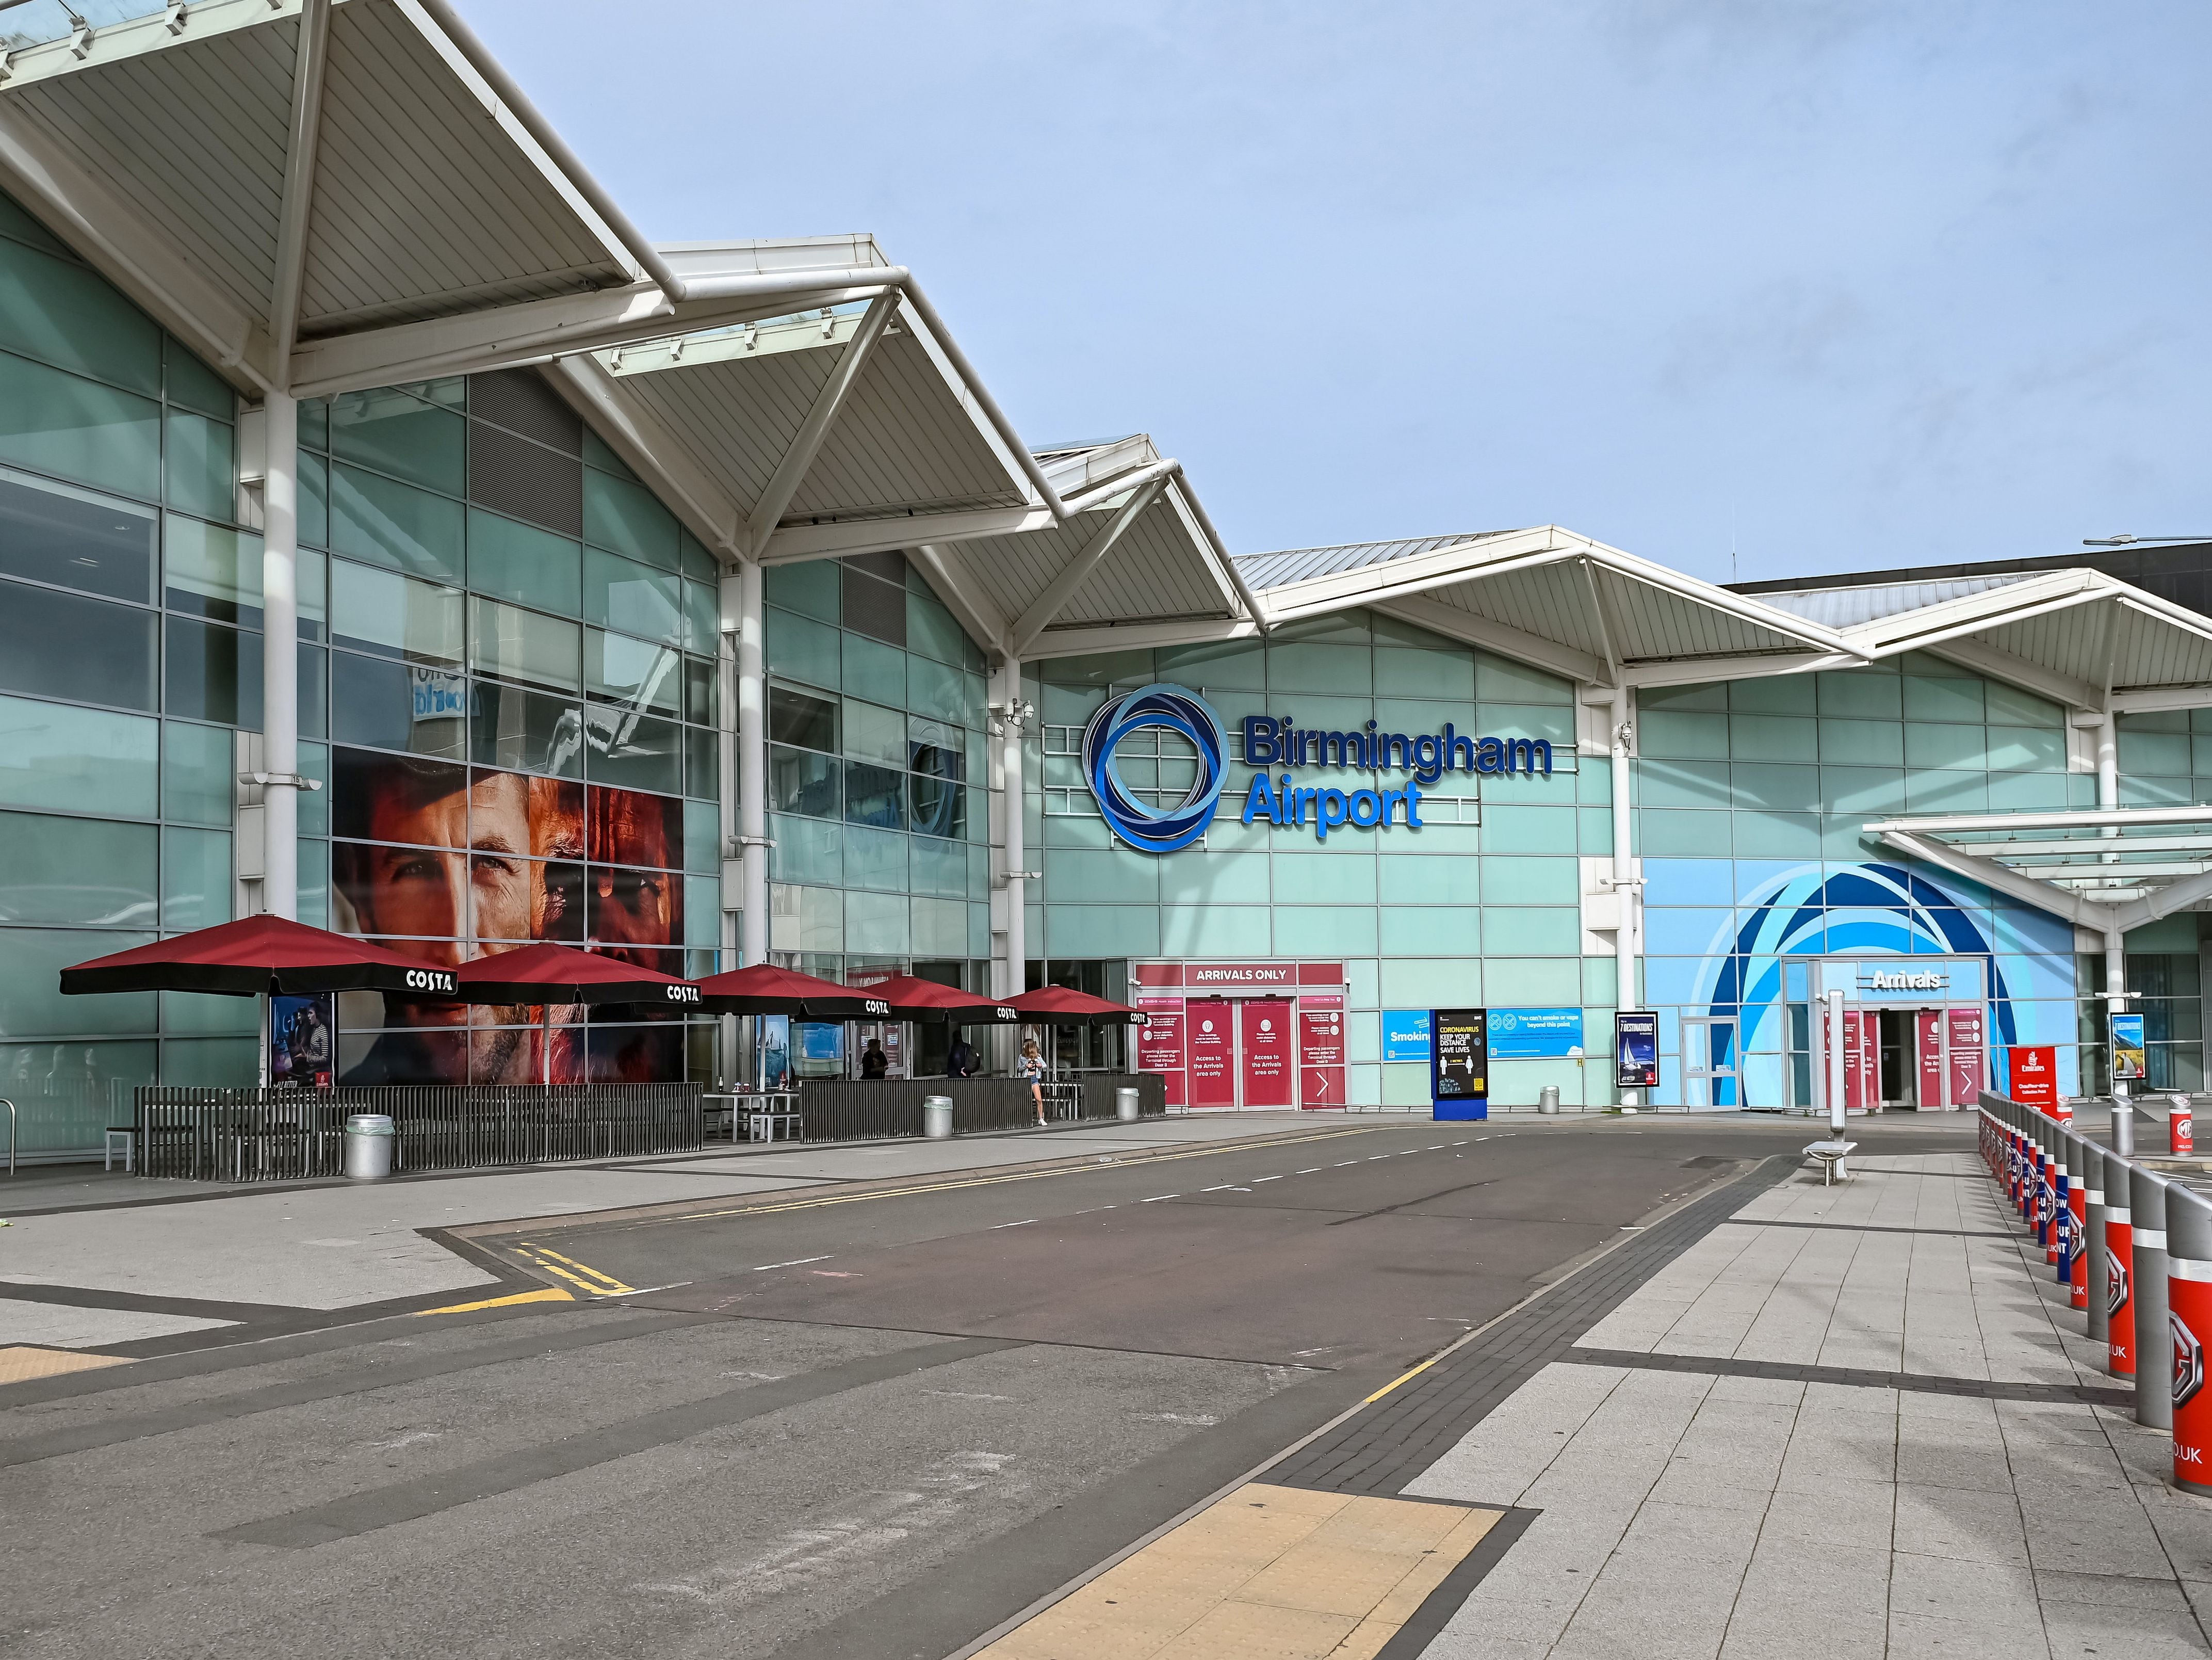 Passengers warned to only buy Birmingham Airport fast track tickets from official website